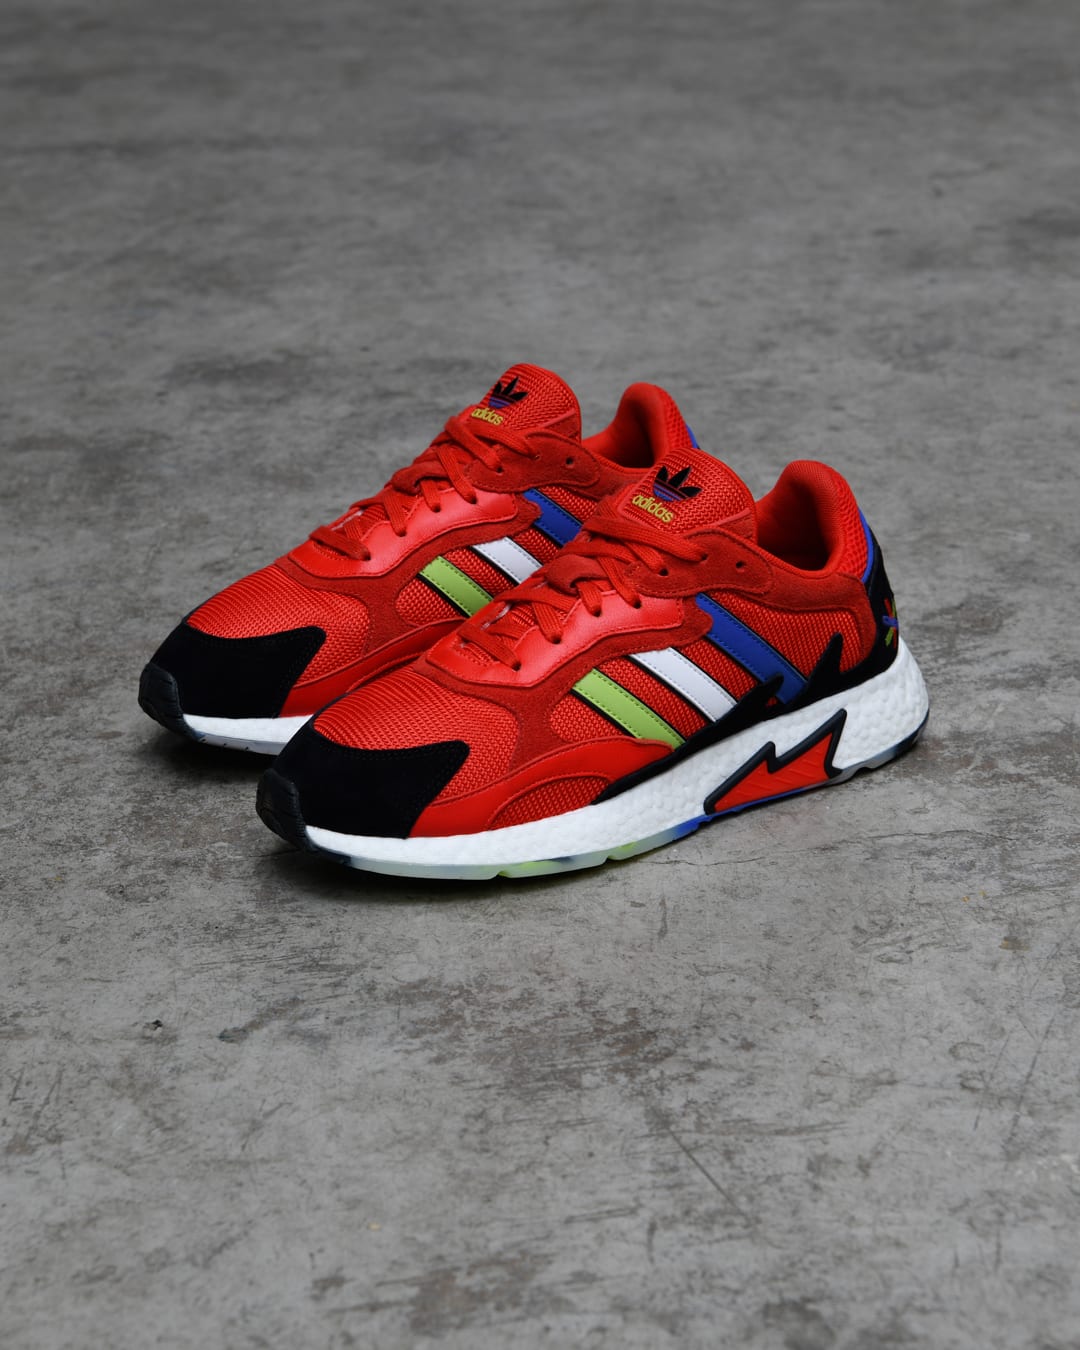 Adidas Originals And Foot Locker Drop A Limited-Edition 'Red' Tresc Run To  Launch The 